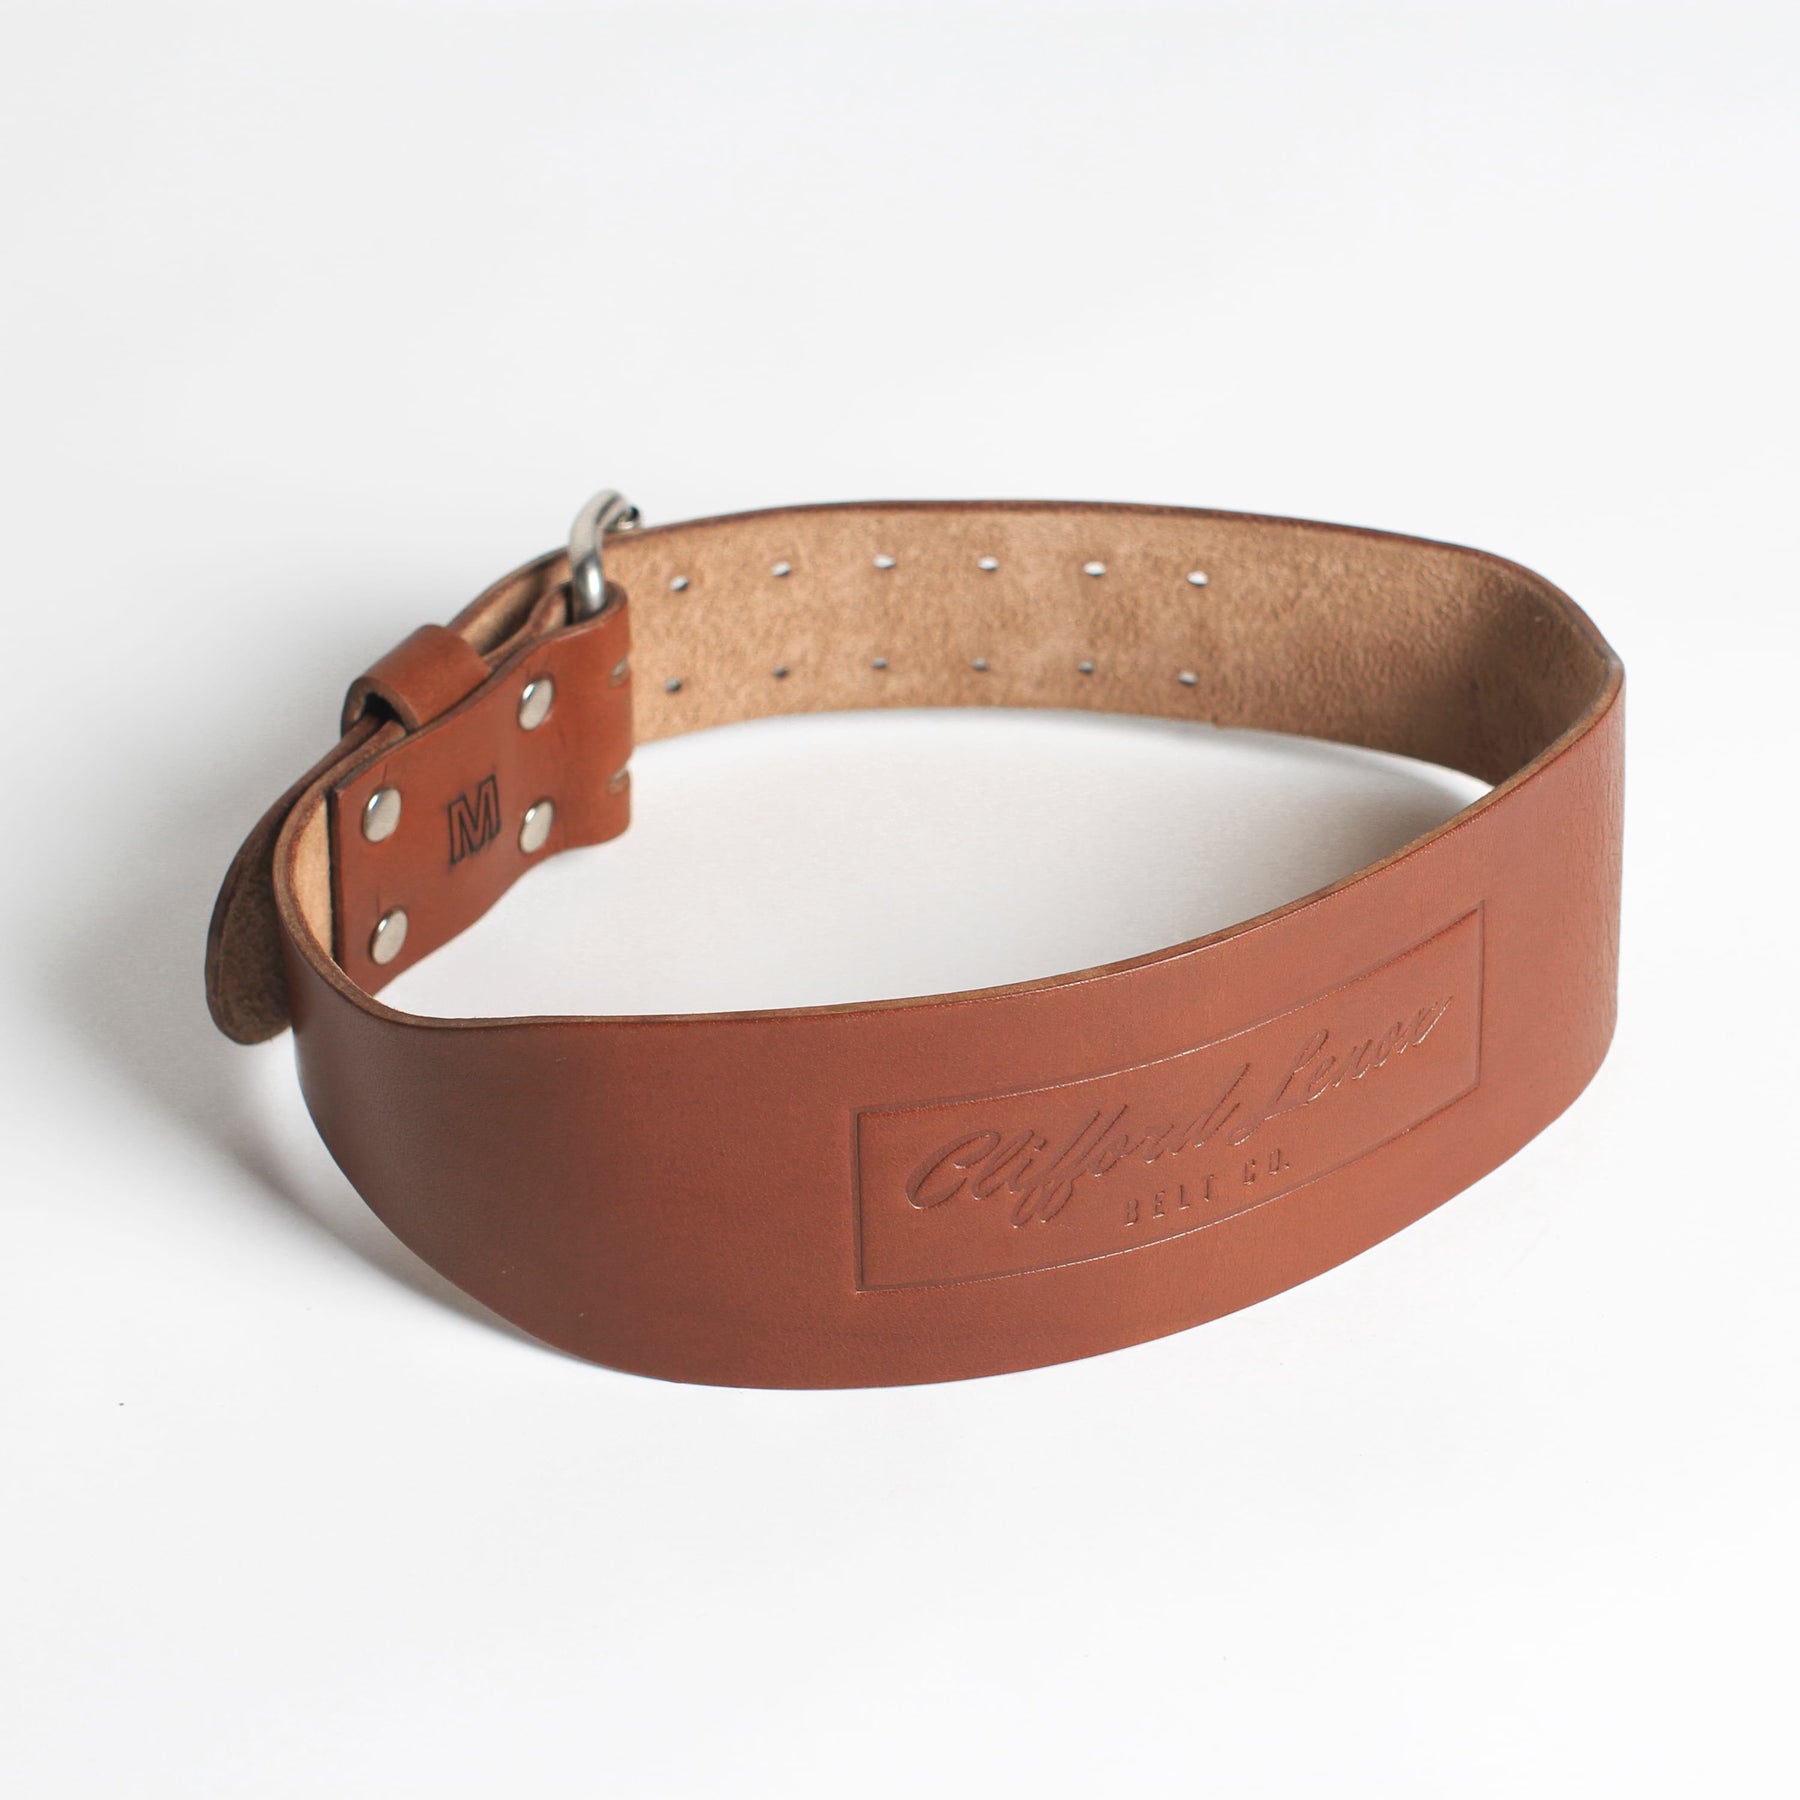 Brown Leather Lifting Belt - Best Quality for Weightlifting